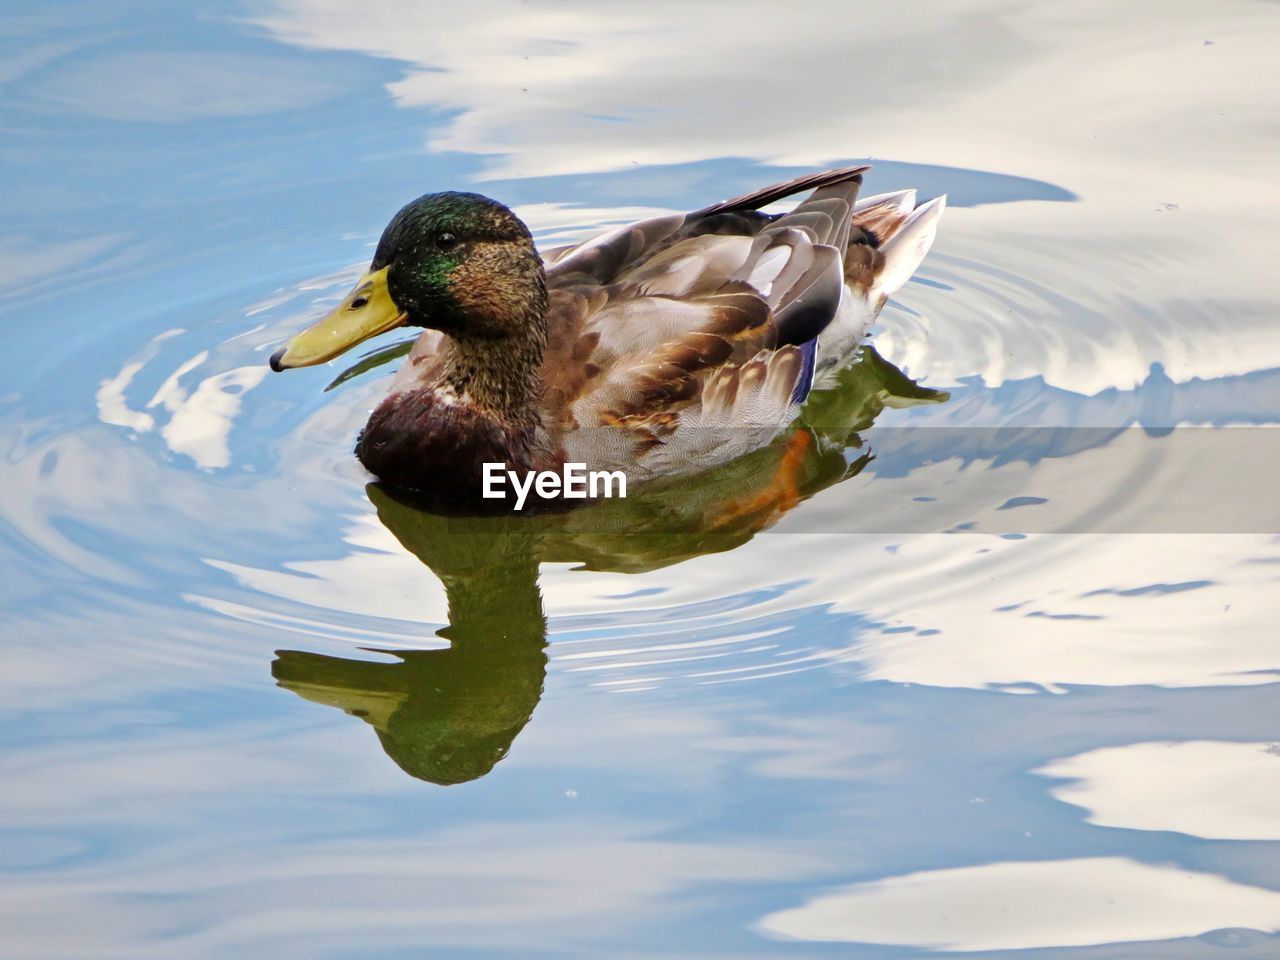 Duck on a lake